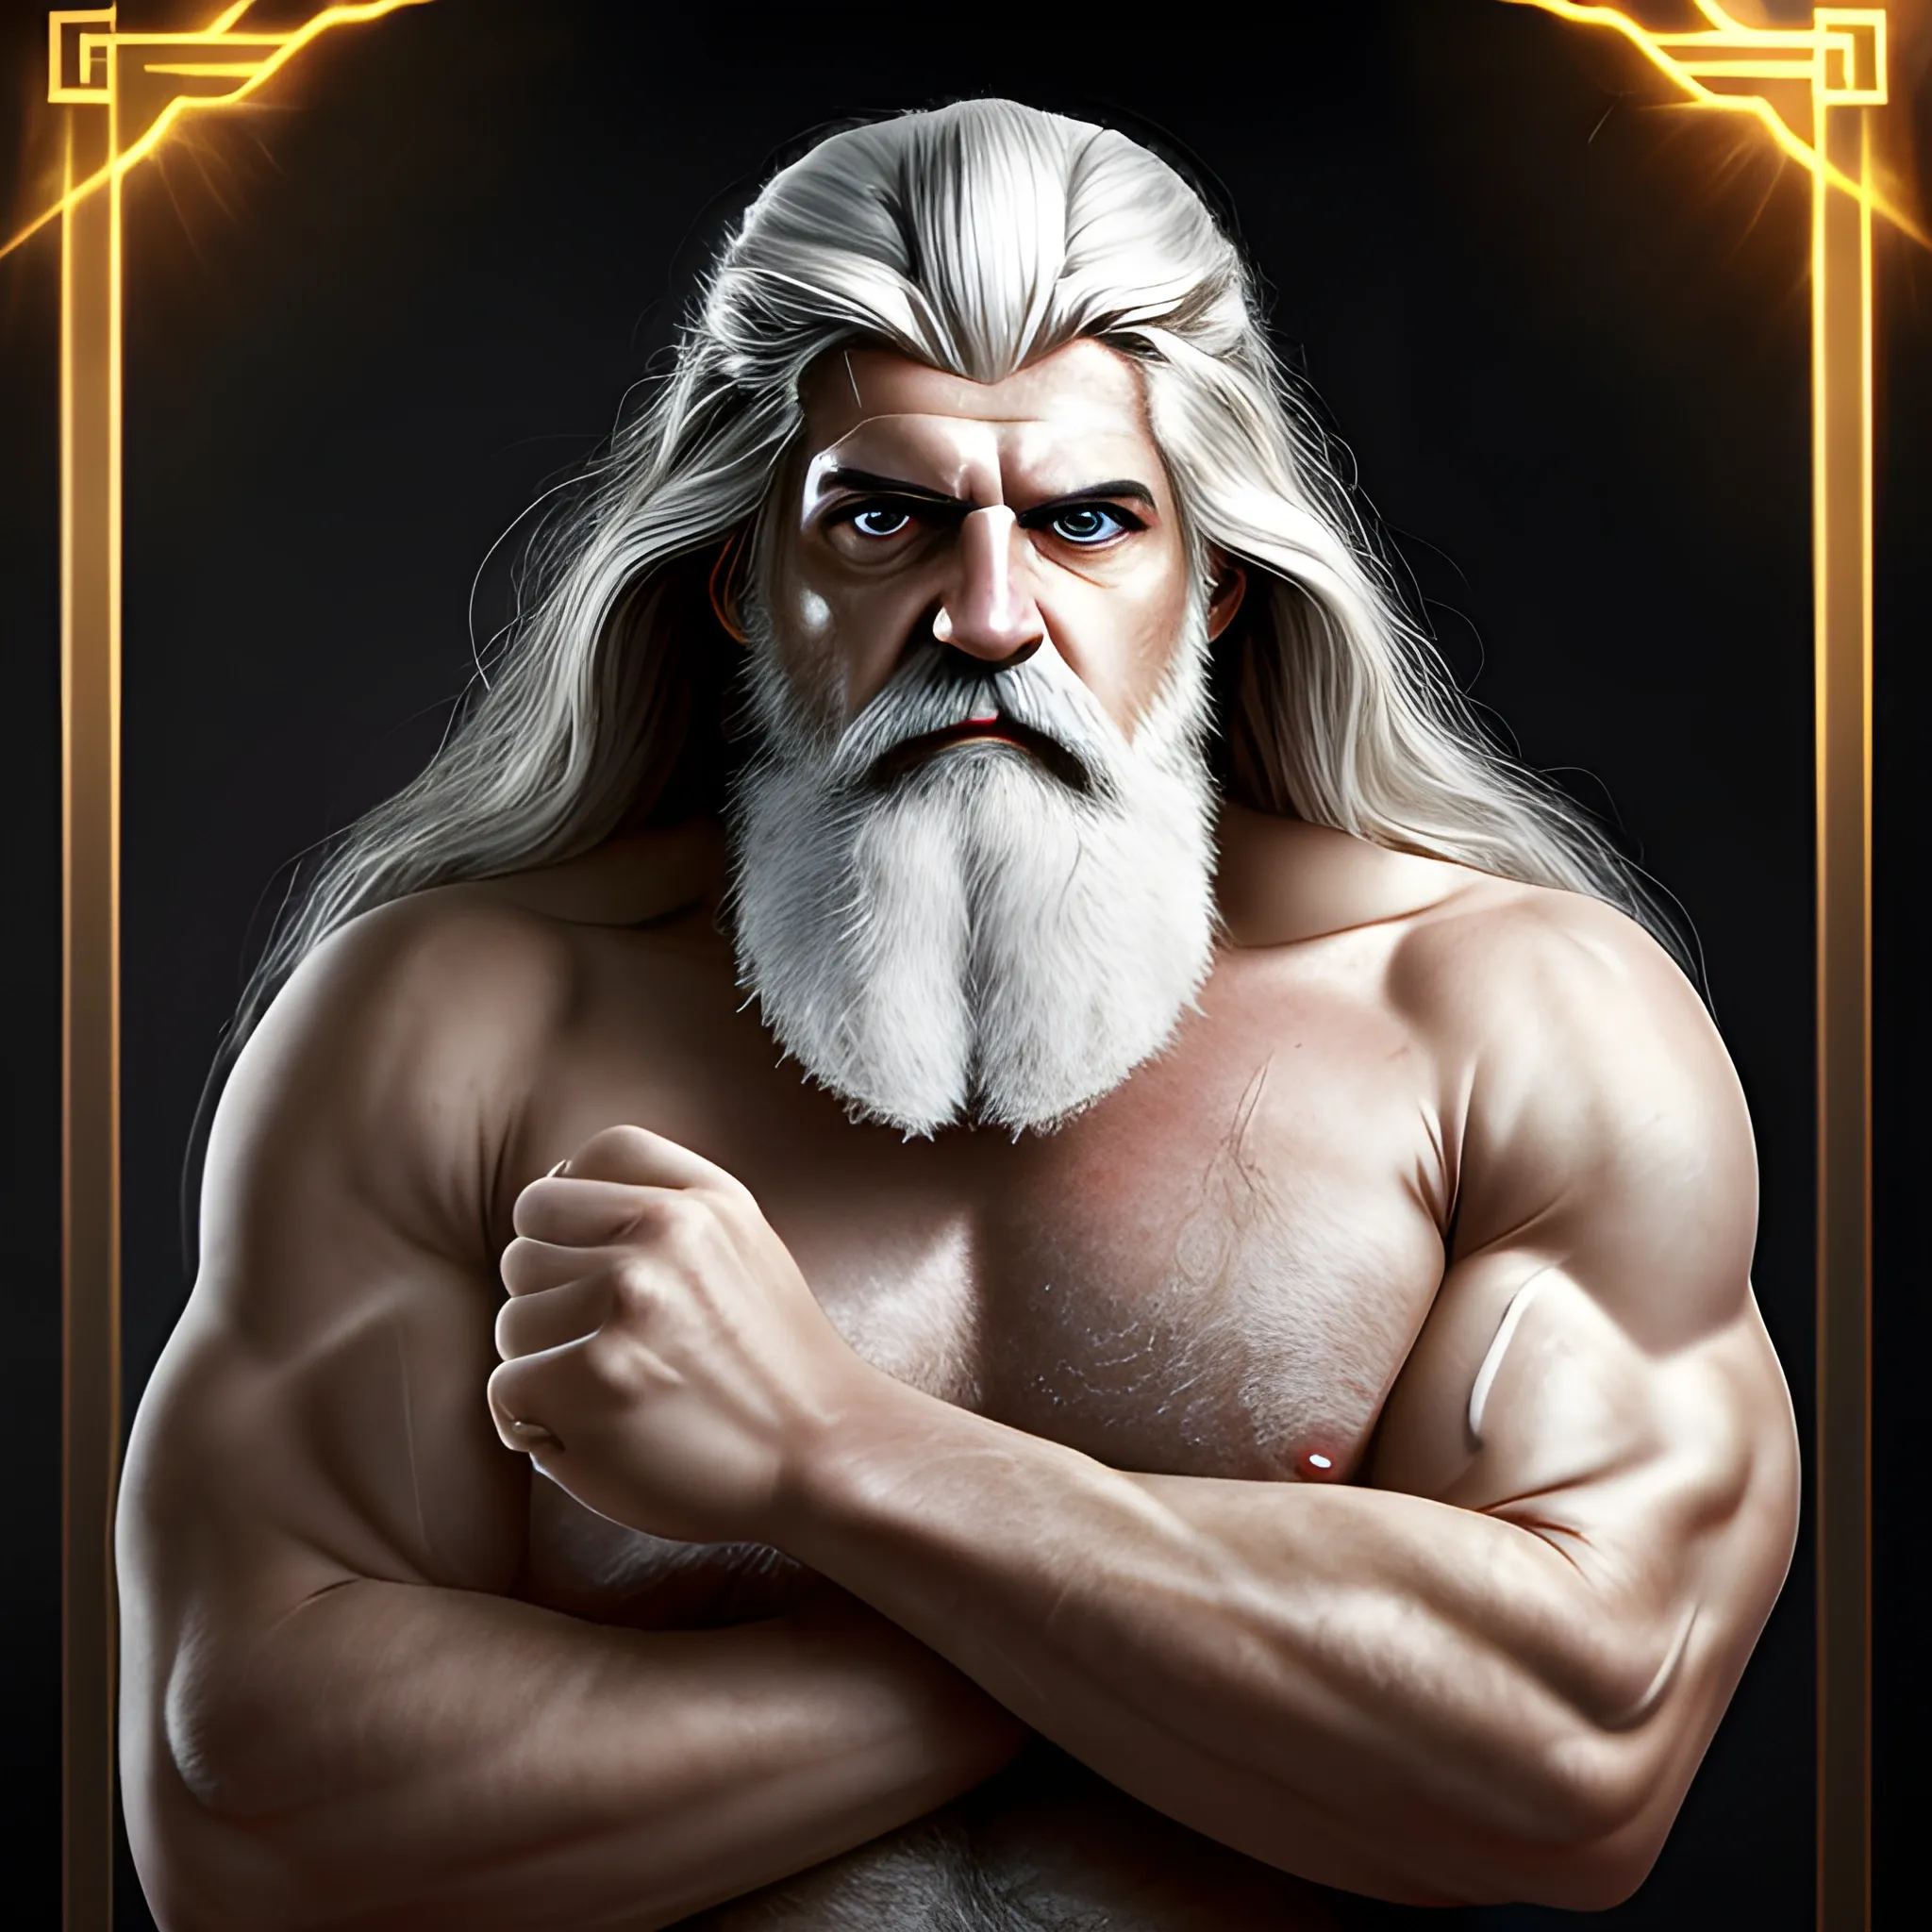 zeus god of thunder, man in old age, thunder, strong, stocky, white hair, golden, shining, shining eyes, withering gaze, clear eyes, shining, illuminated eyes, severity, fury, impetus, greek clothing, full body, face gaunt, fair complexion, muscles, cinematographic lighting, (photo: wide shot), white beard, long hair, Greek features, thunder in the hands, strength, 4k, 3d, hyperrealism